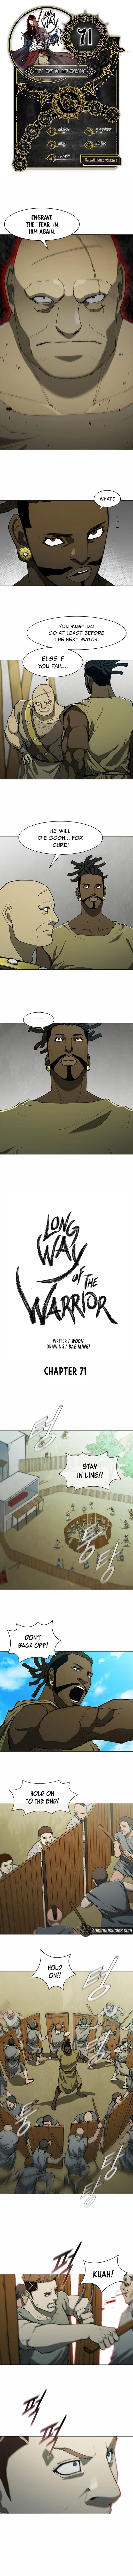 Long Way of the Warrior - Chapter 71 Page 1